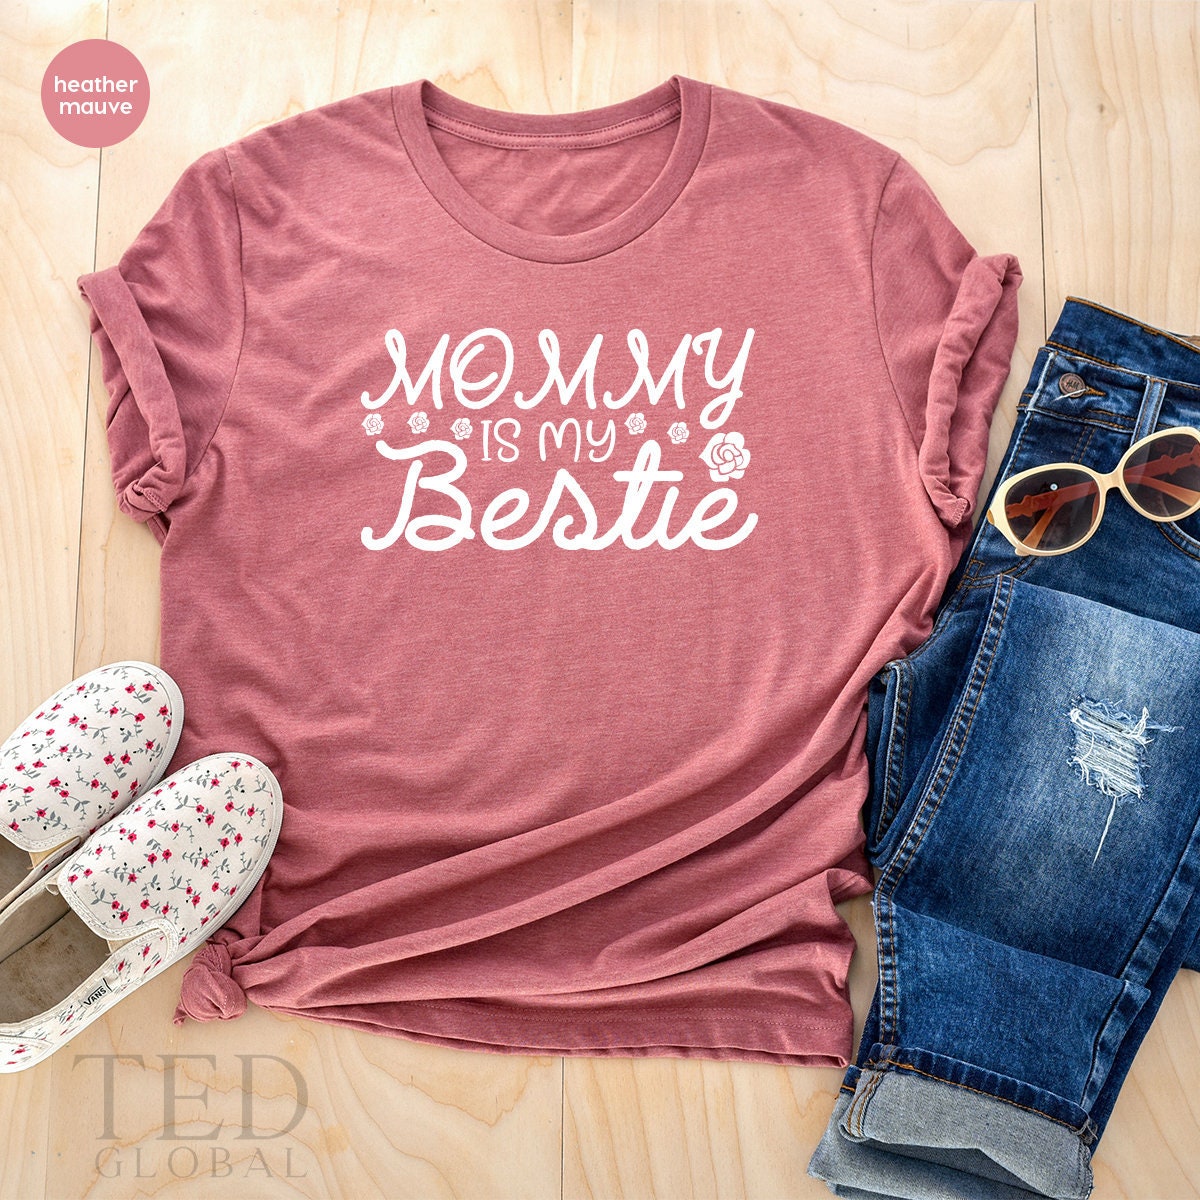 Best Mom TShirt, Mama T Shirt, Cute Mommy T-Shirt, Mothers Day Gifts, Mommy Is My Bestie Shirt, Mother Birthday T Shirt, Friend Mom Tee - Fastdeliverytees.com